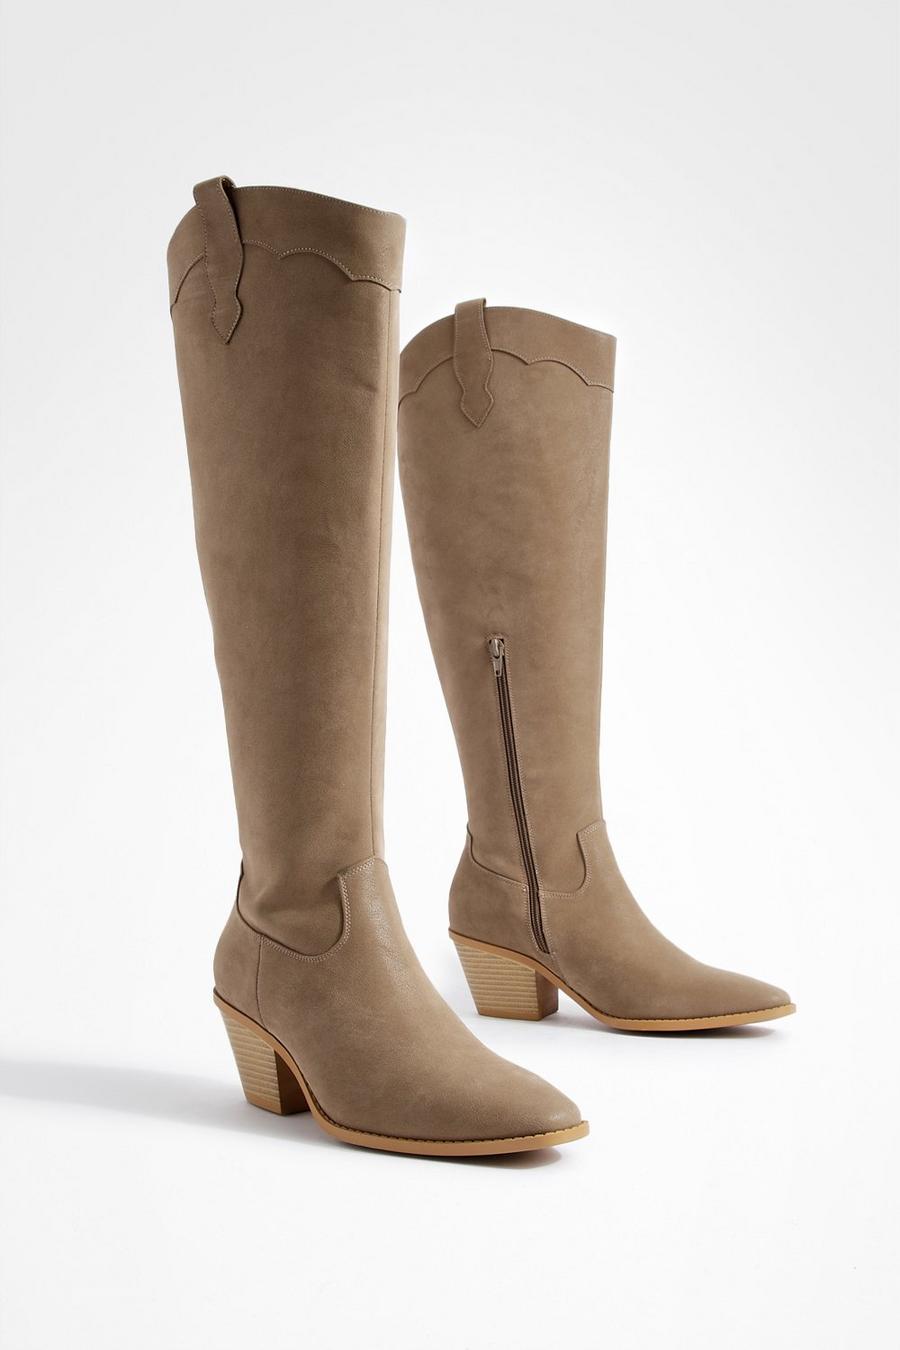 Taupe Knee High Cowboy Western Boots